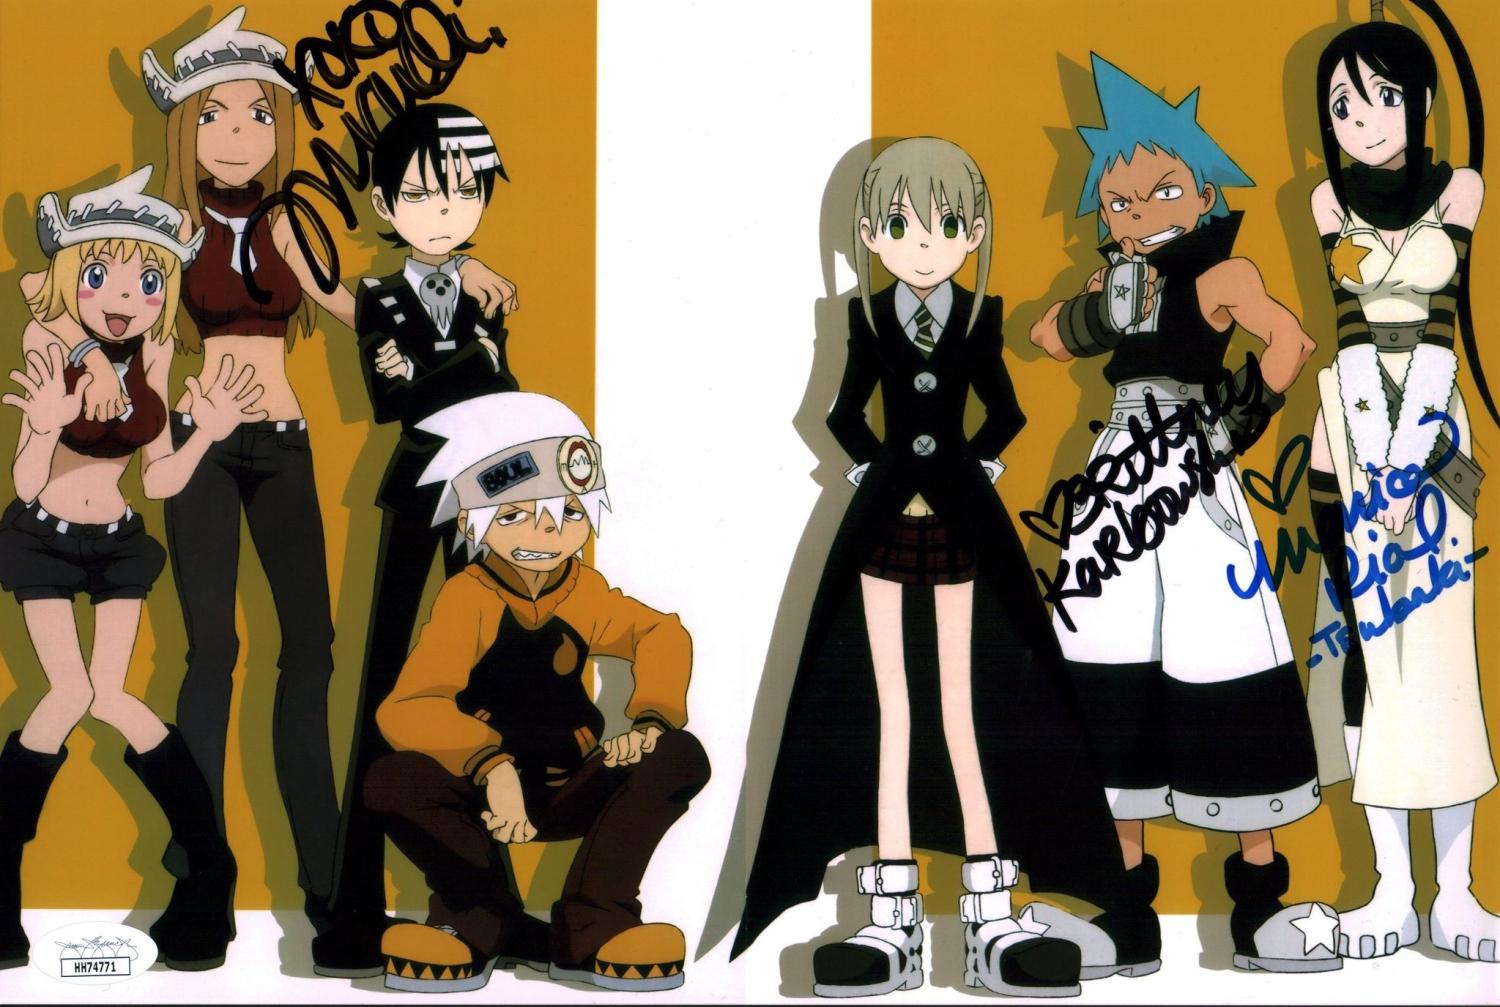 Soul-Eater-8x12-Photo-Signed-Autograph-Rial-Karbowski-Marchi-JSA-Certified-COA-GalaxyCon-1611238967_1024x1024@2x